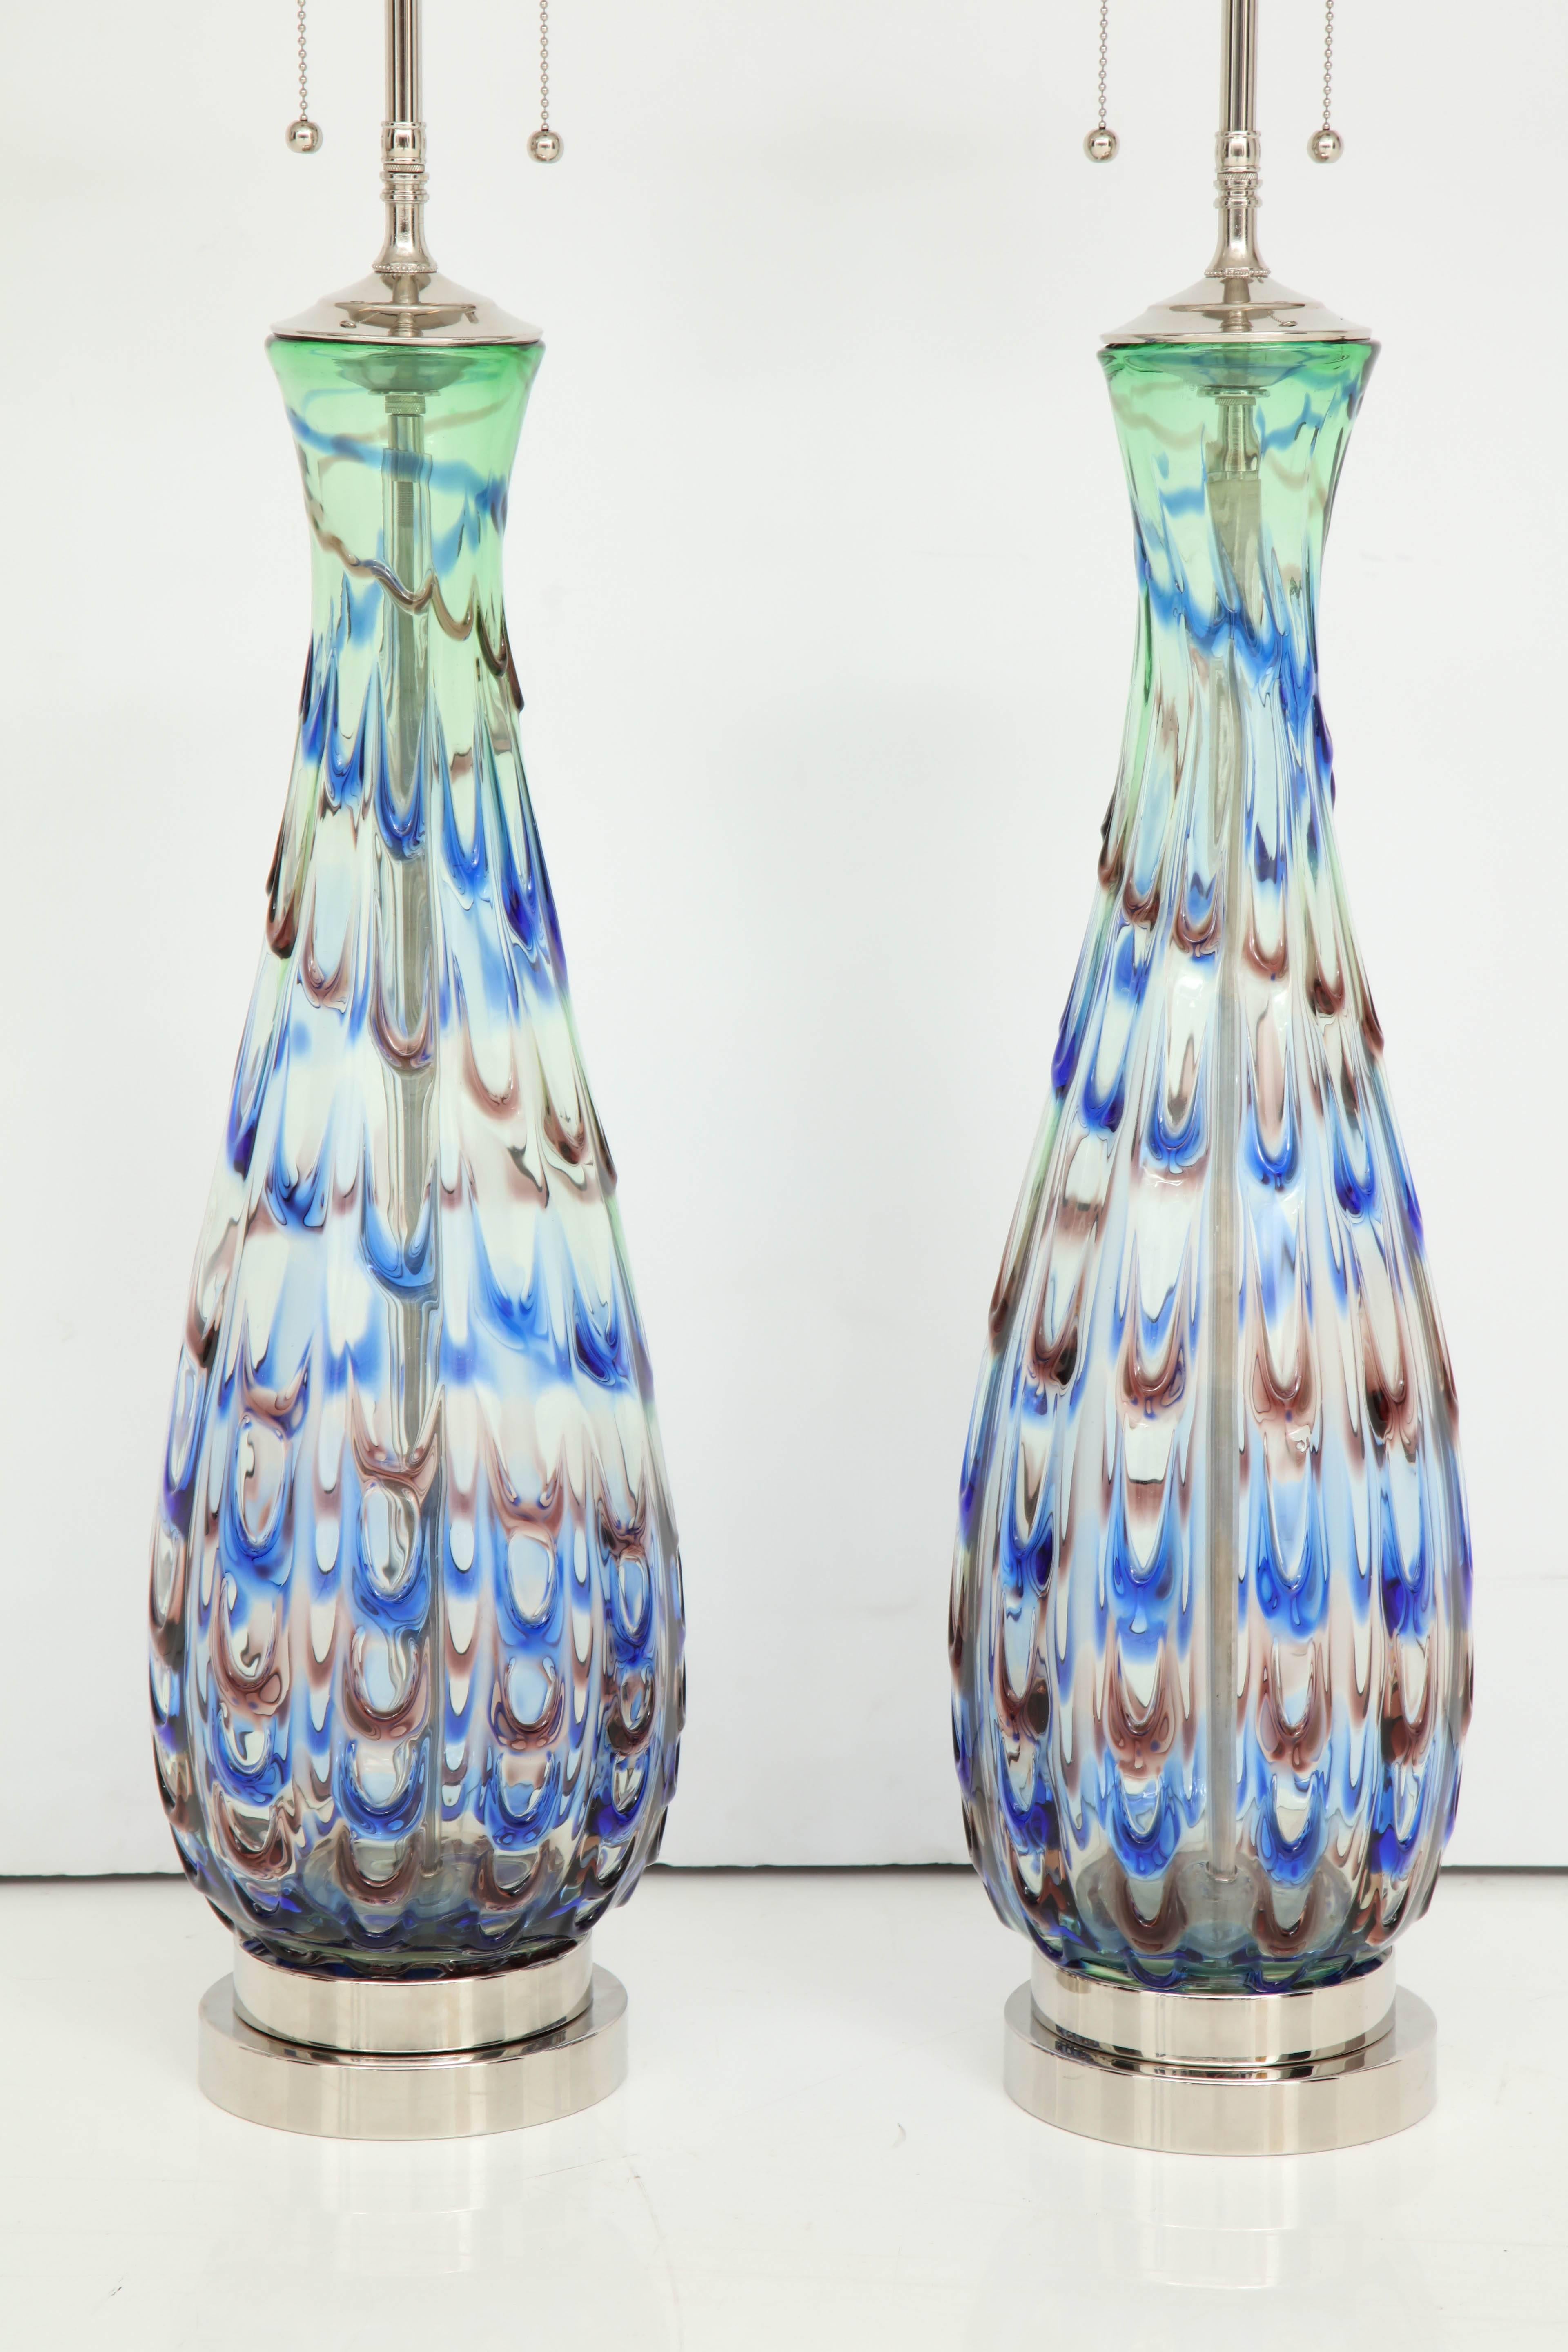 Beautiful pair of 1960s Murano glass lamps with a feathered design pattern.
The clear glass lamp bodies have a feathered design of blue, green and red and they are mounted on double stacked polished nickel bases.
The lamps have been newly rewired